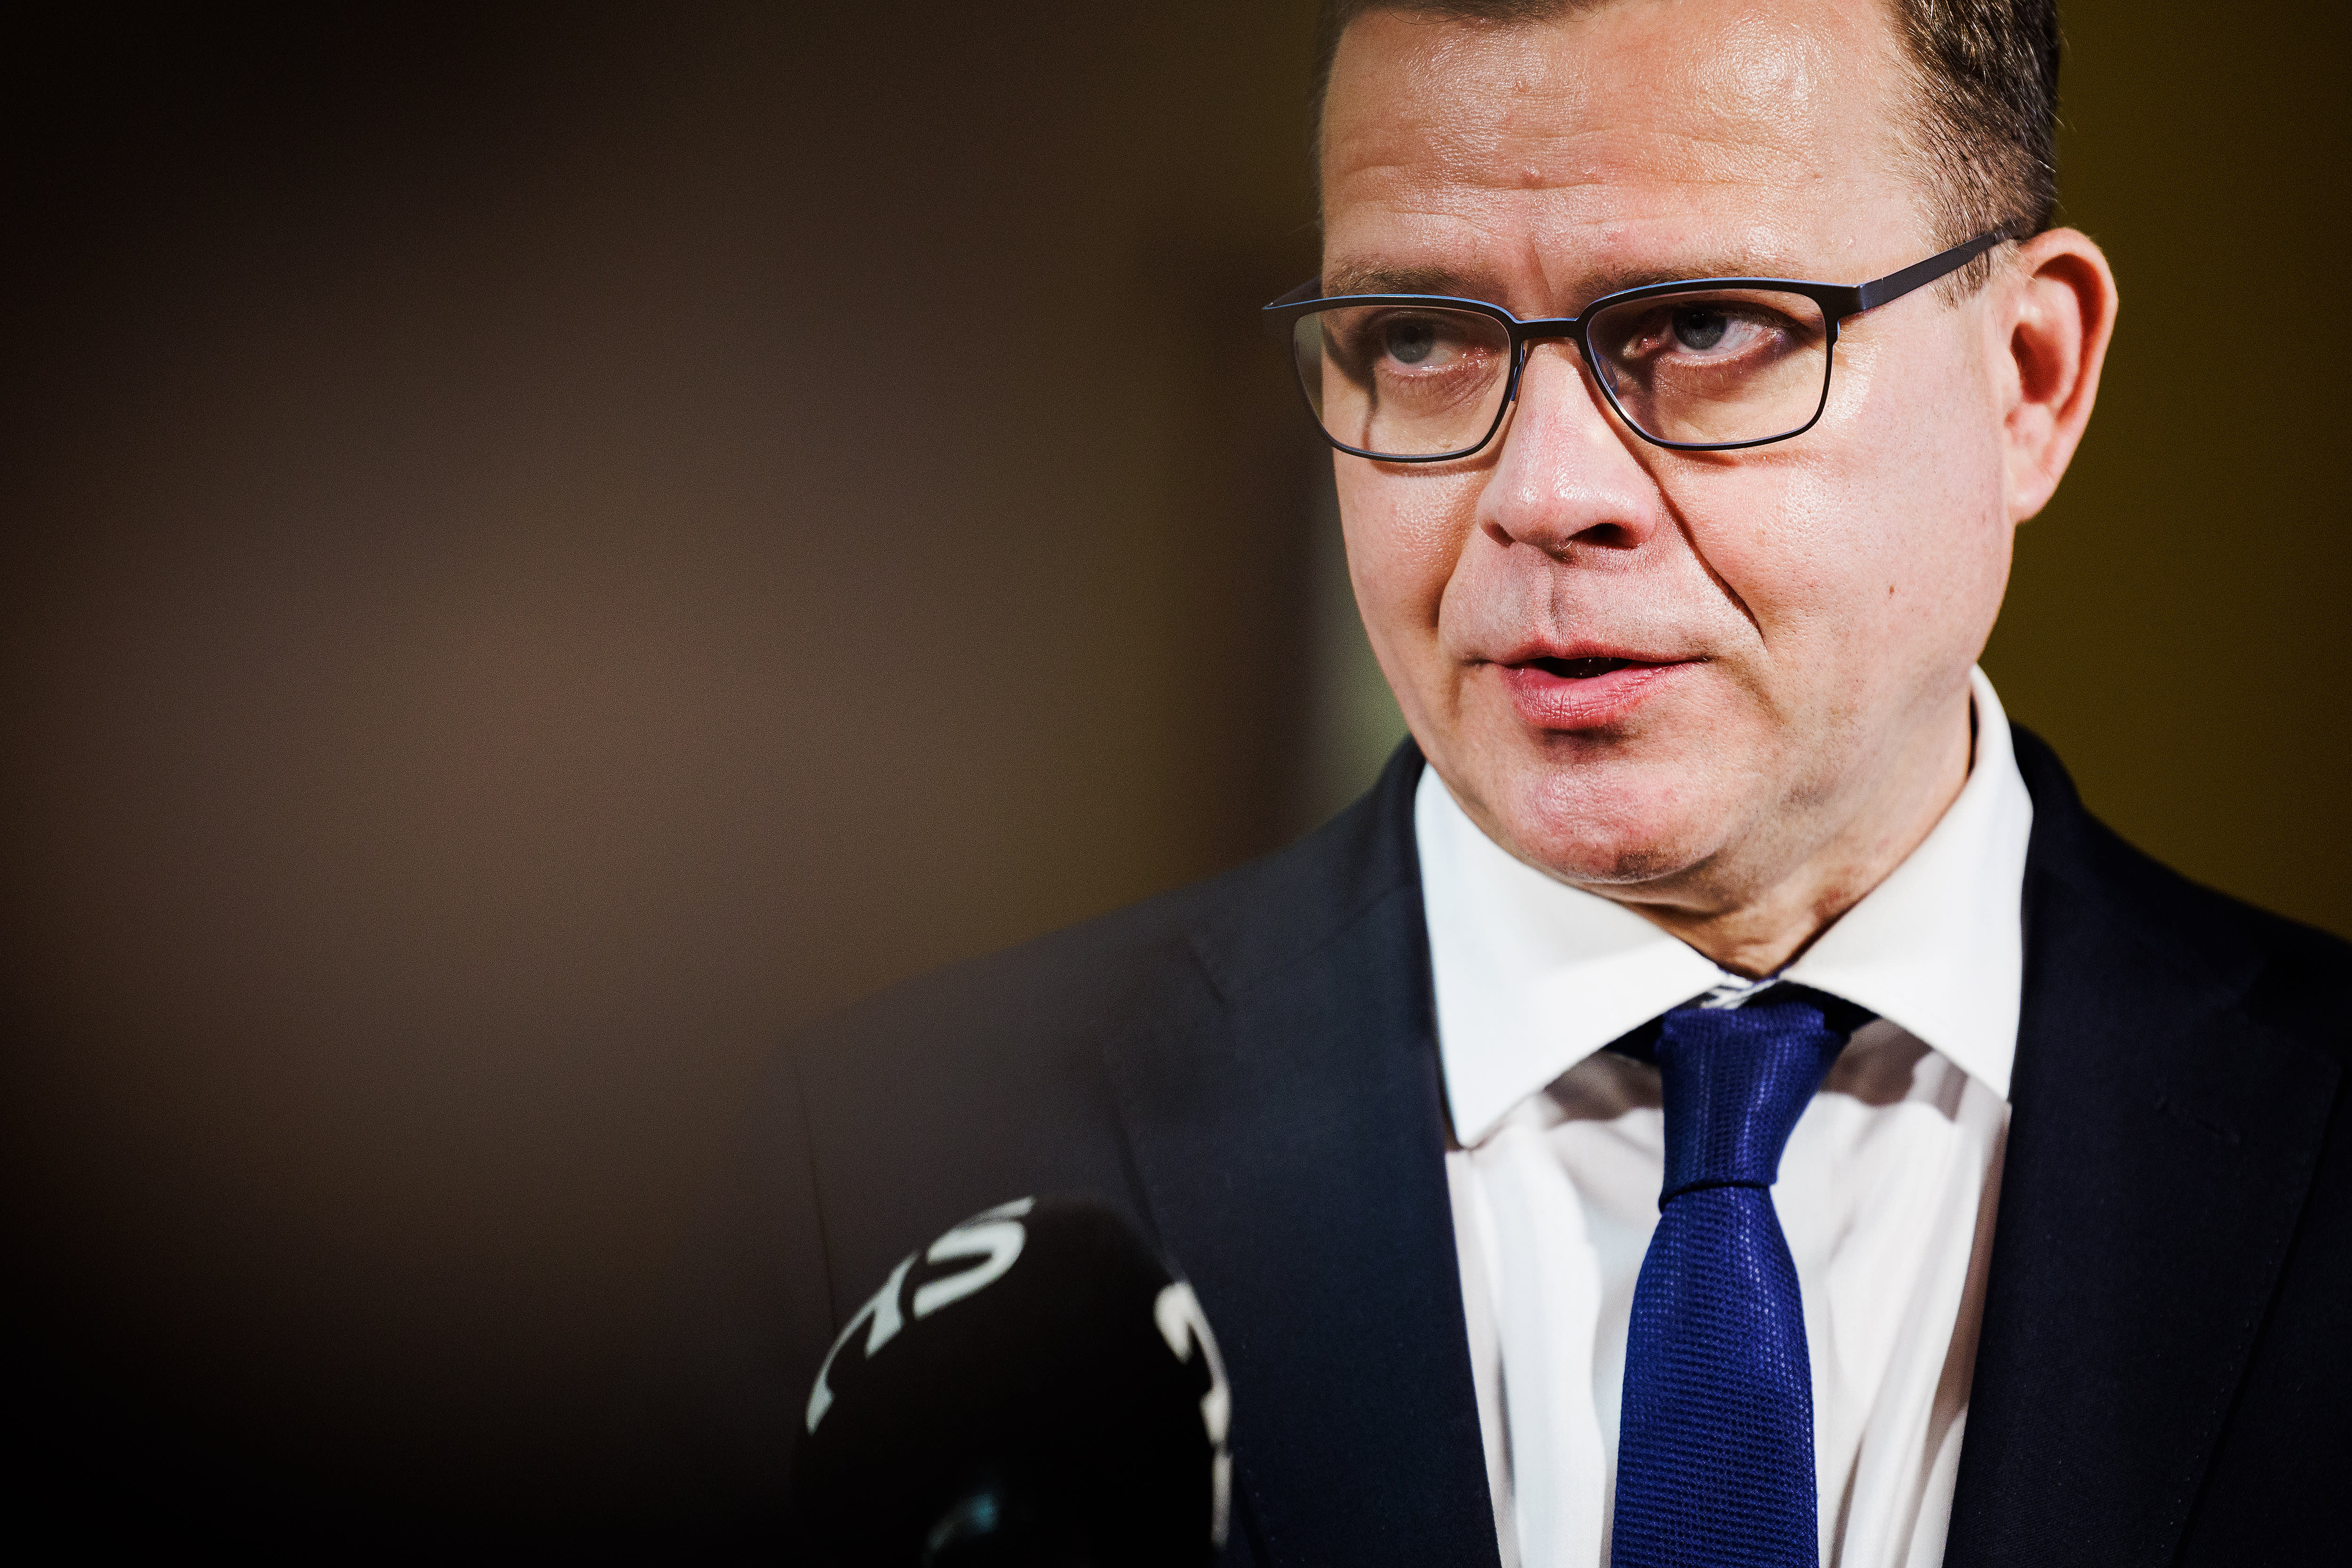 Government negotiators agreed on an additional 500 police officers, Yle’s sources say